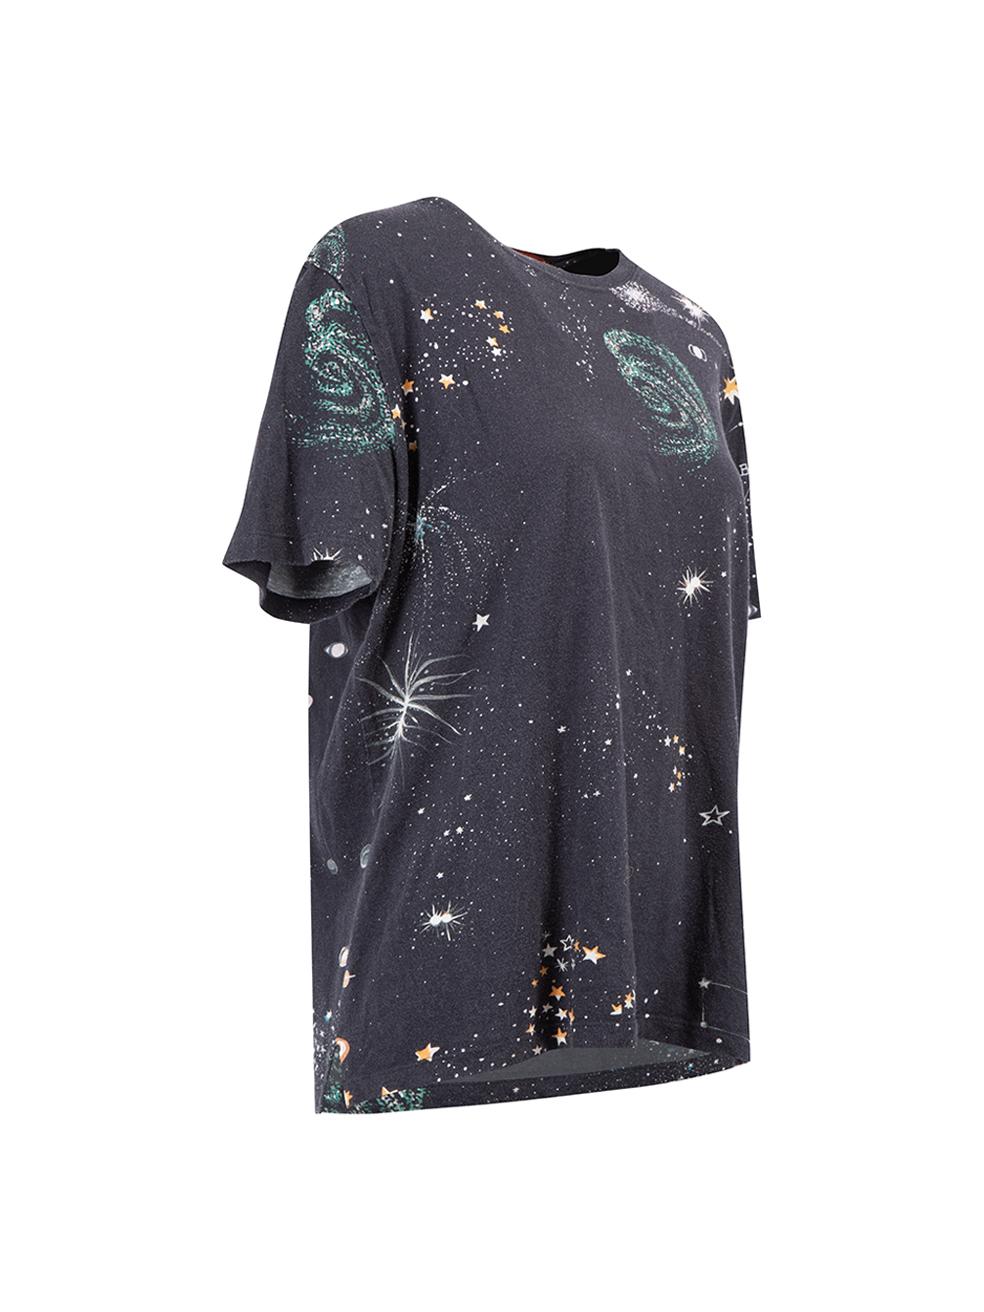 CONDITION is Very good. Minimal wear to t-shirt is evident. Overall wear to the outer cotton fabric on this used Valentino designer resale item.   Details  Navy Cotton Short sleeve T shirt Solar system graphic print Round neckline   Made in Italy 